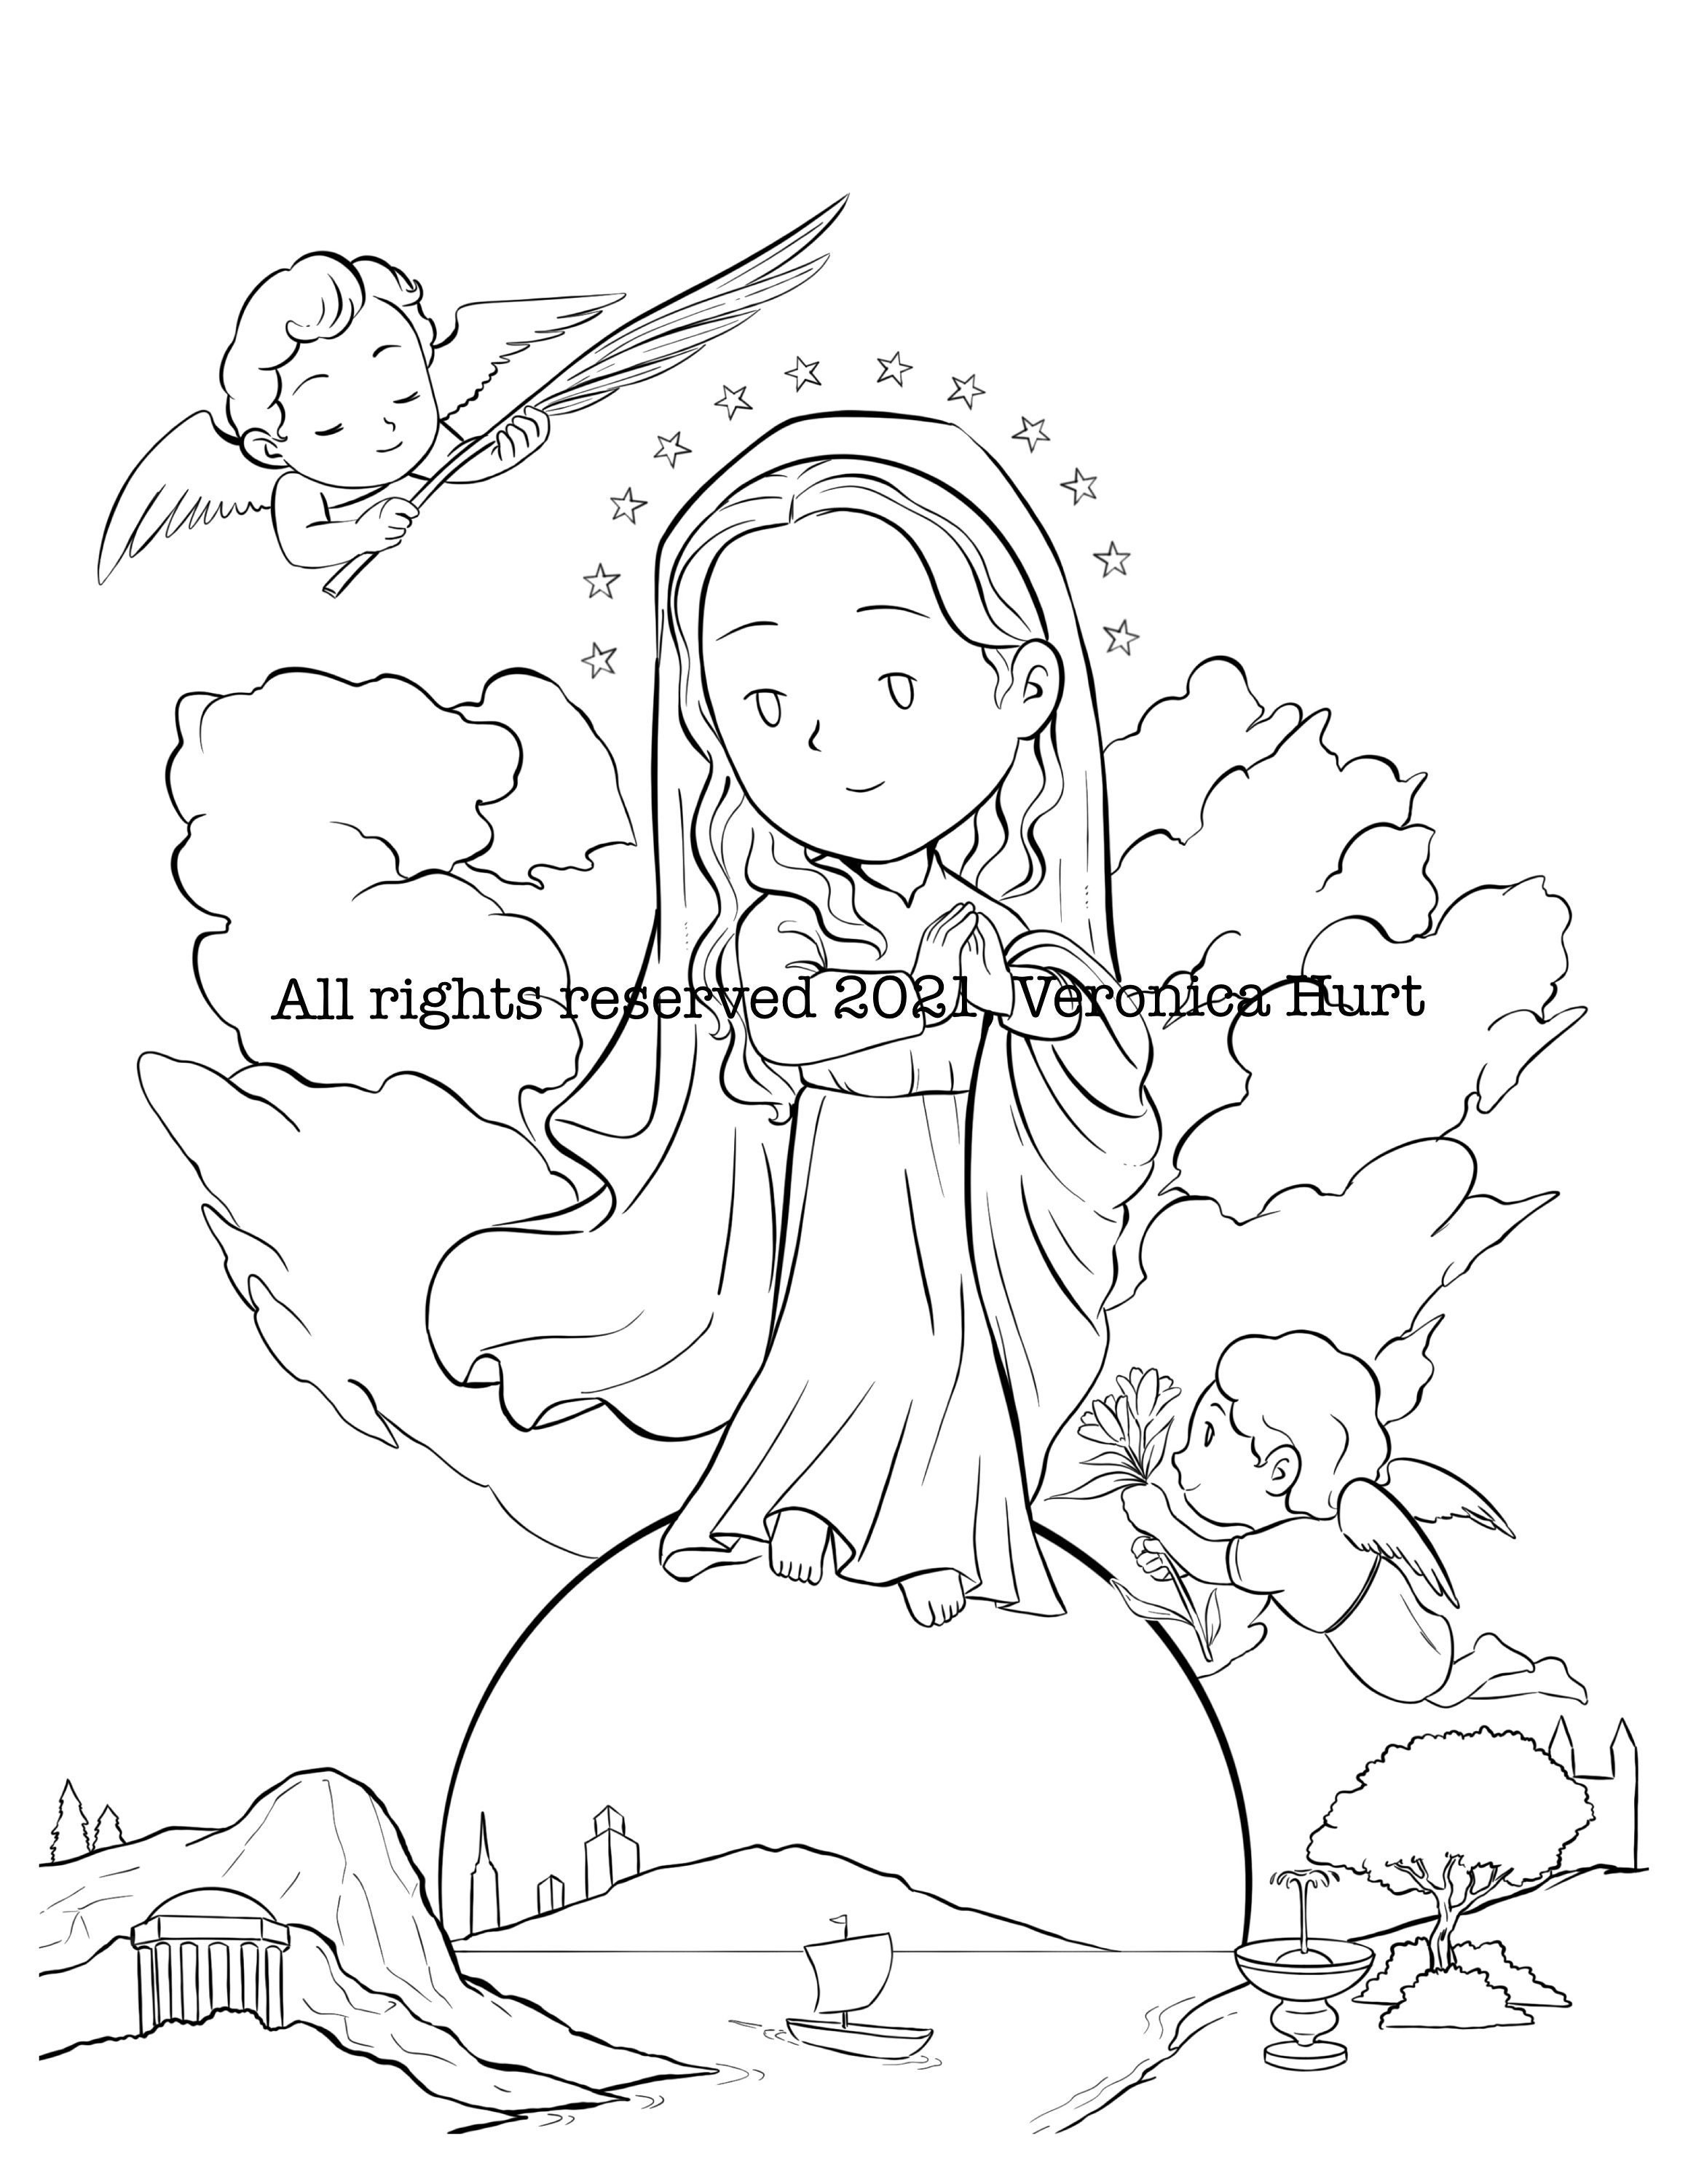 The immaculate conception inspired by diego velãzquez saint mary coloring page for kids and adults instant download